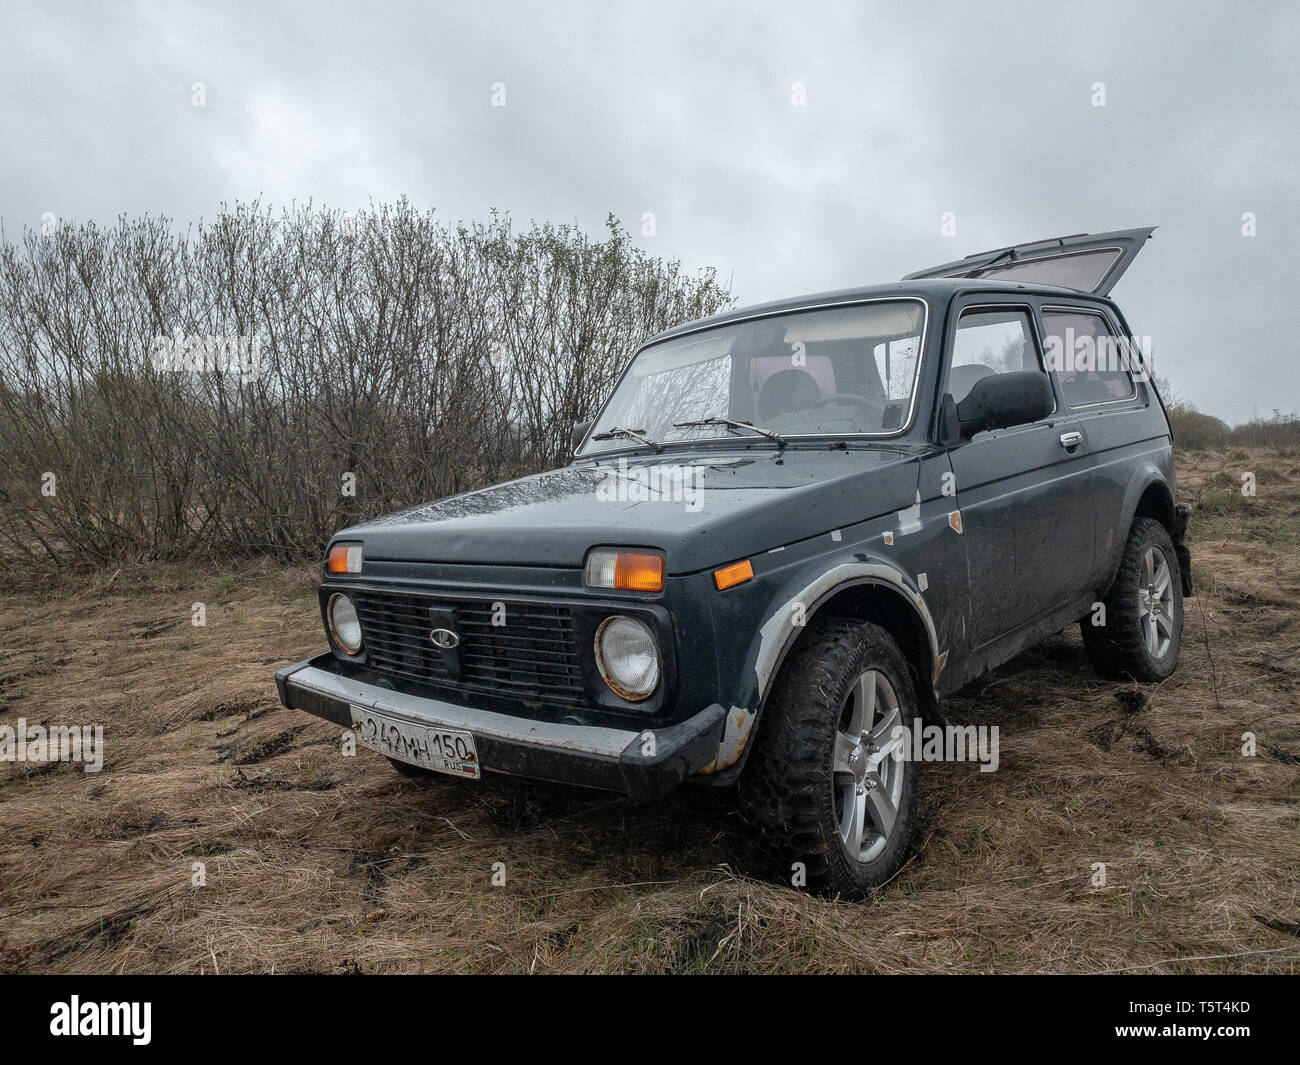 Moscow, Russia - December 25, 2018: Black Russian off-road car Lada Niva  4x4 (VAZ 2121 / 21214) parked on the field Stock Photo - Alamy